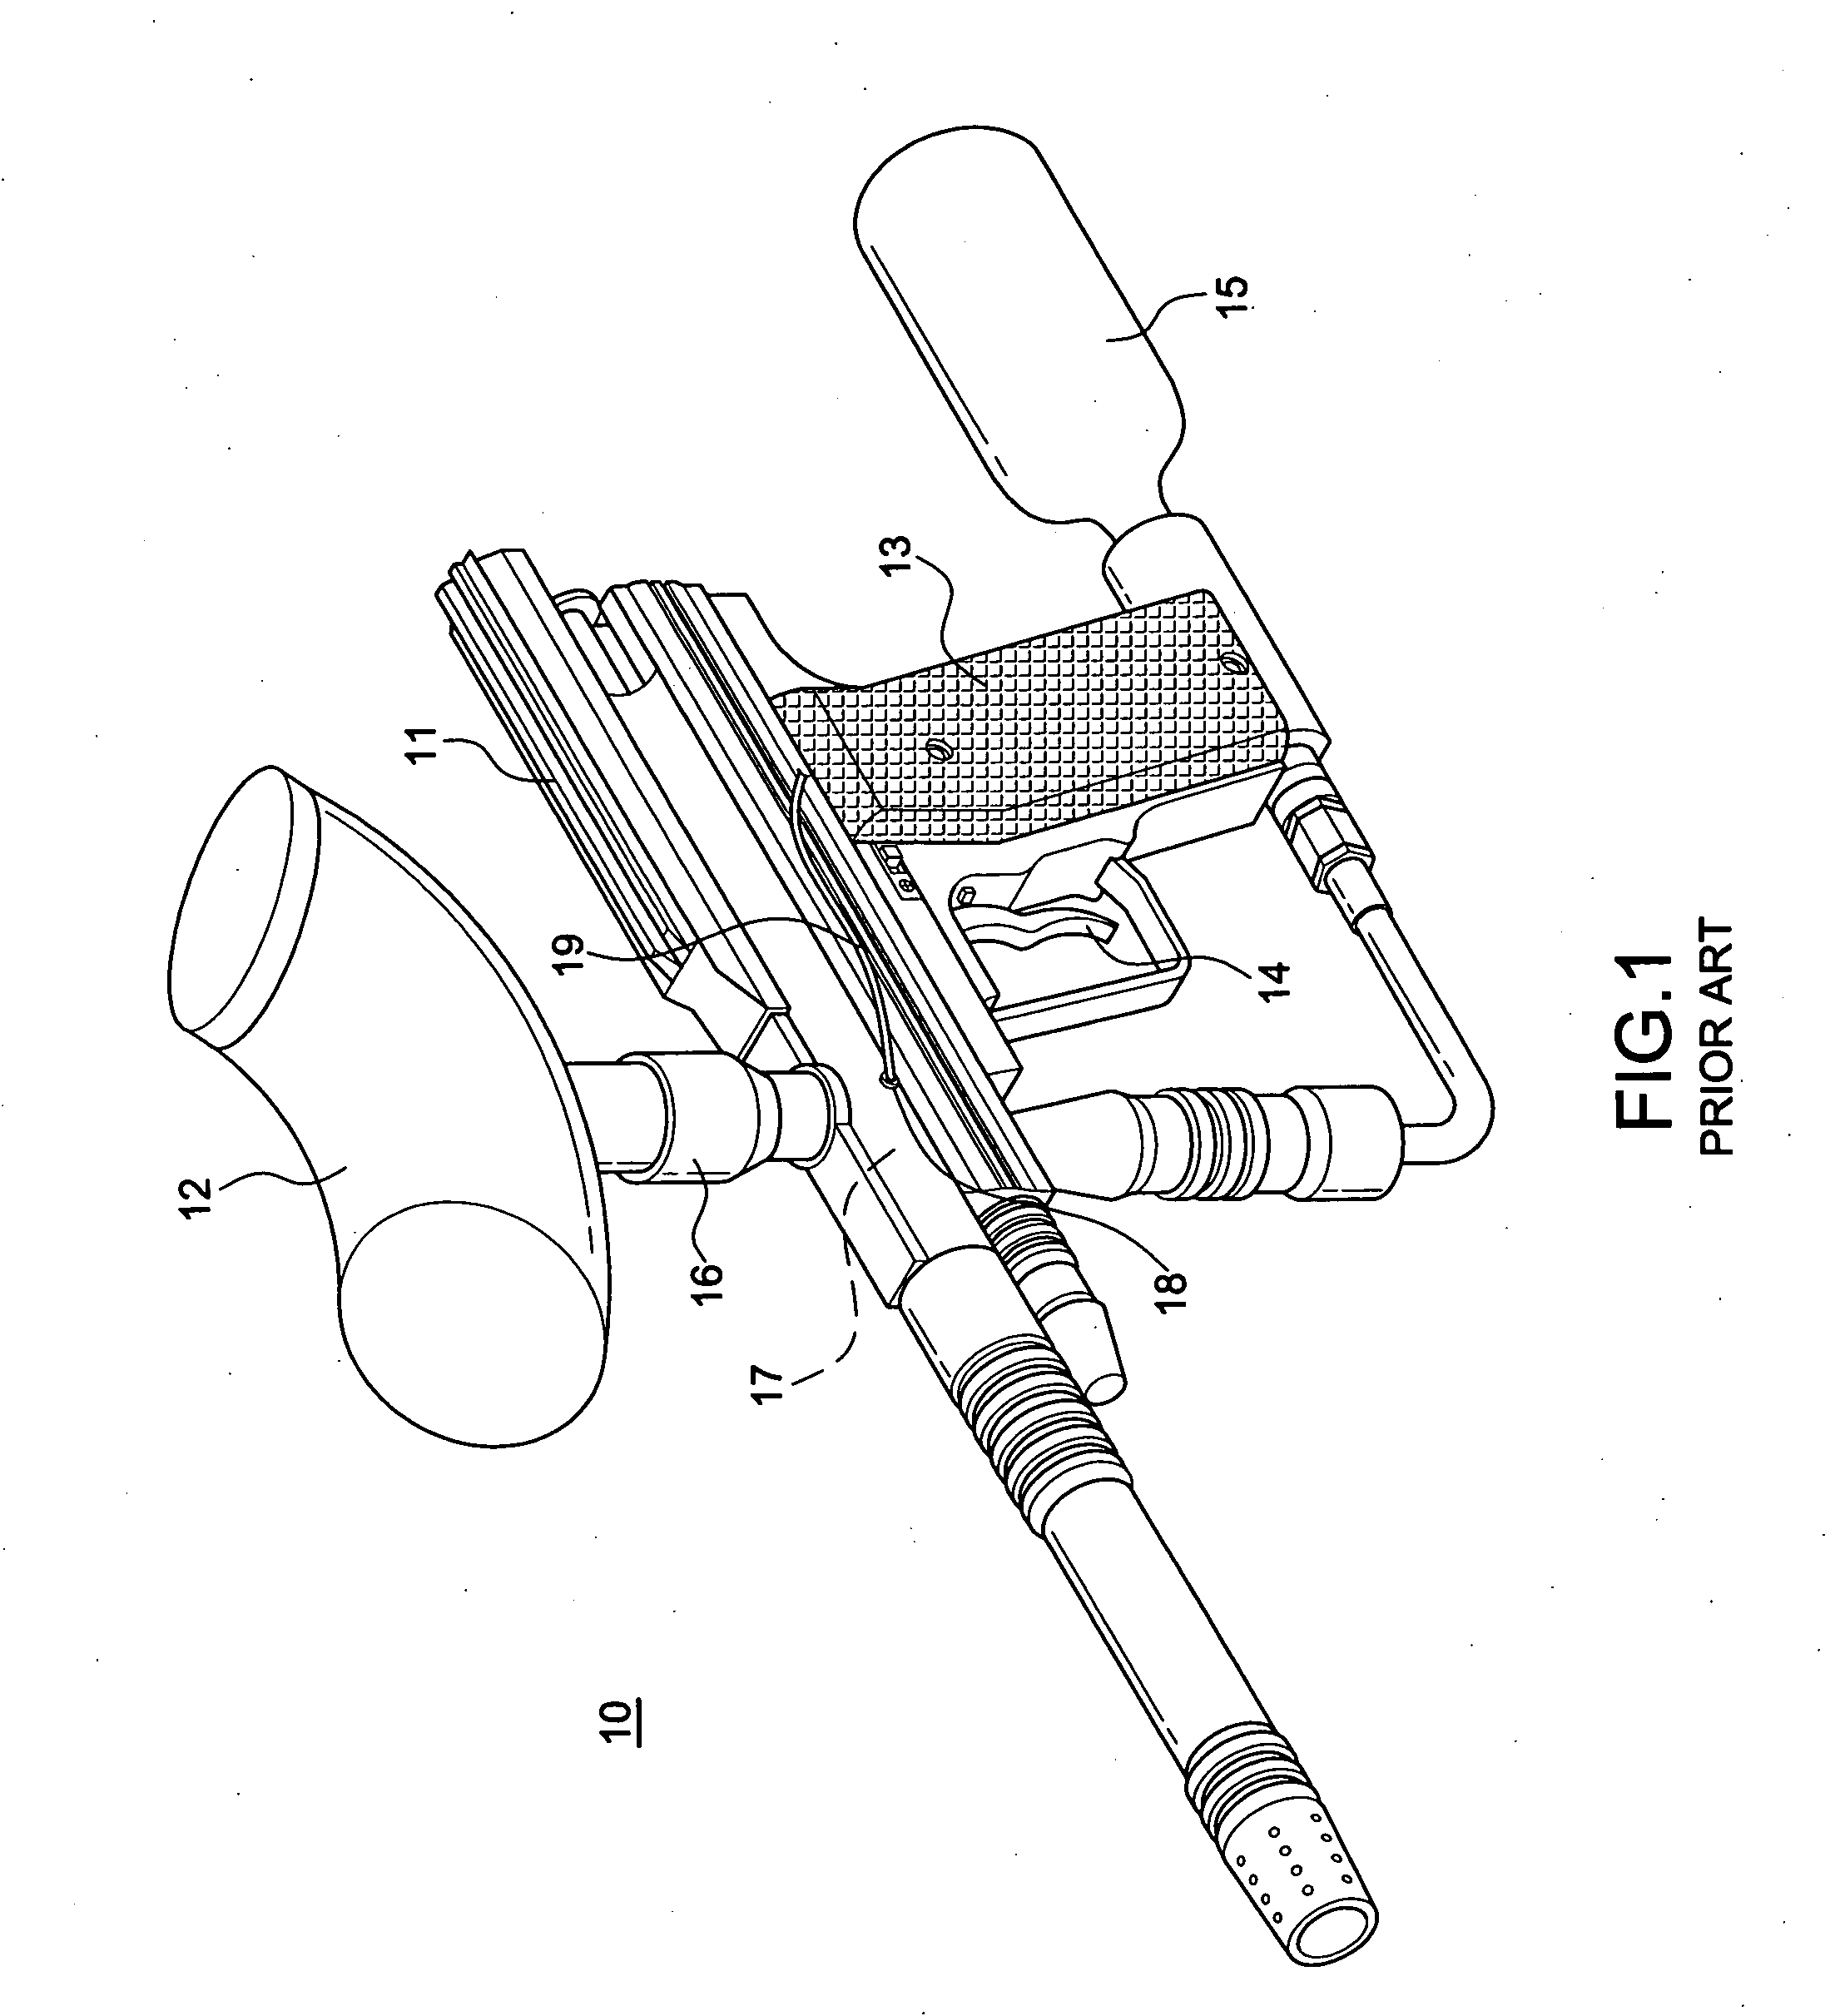 Apparatus for detecting the position of the paintball of a paintball gun